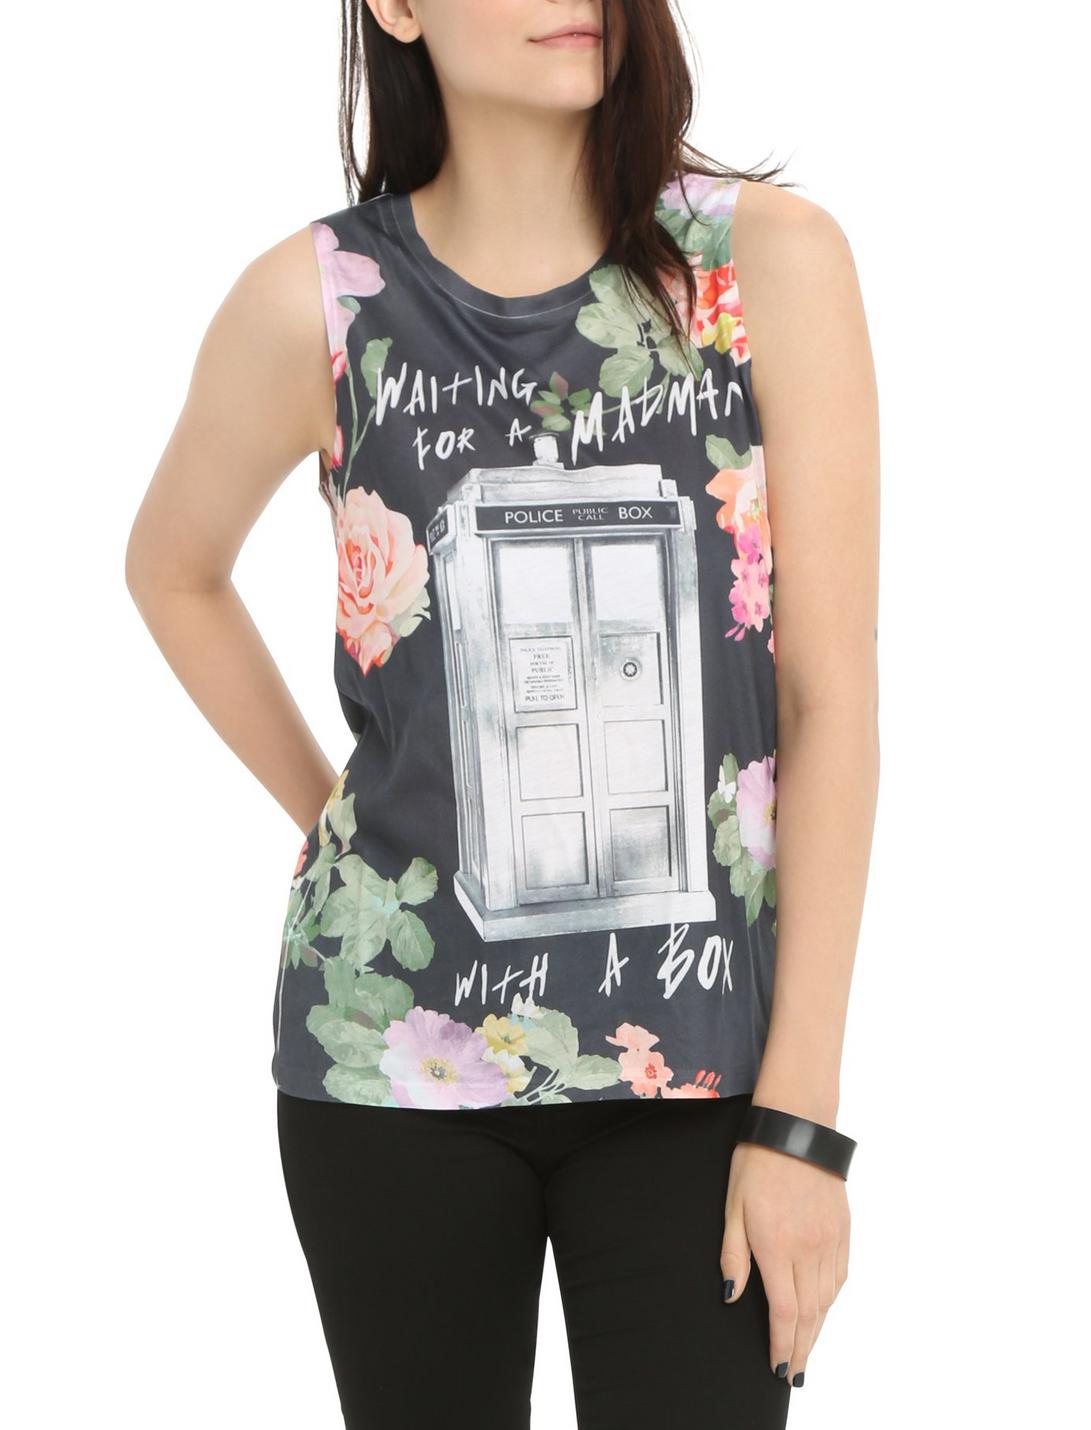 Doctor Who Floral Madman With A Box Sublimation Girls Muscle Top, BLACK, hi-res